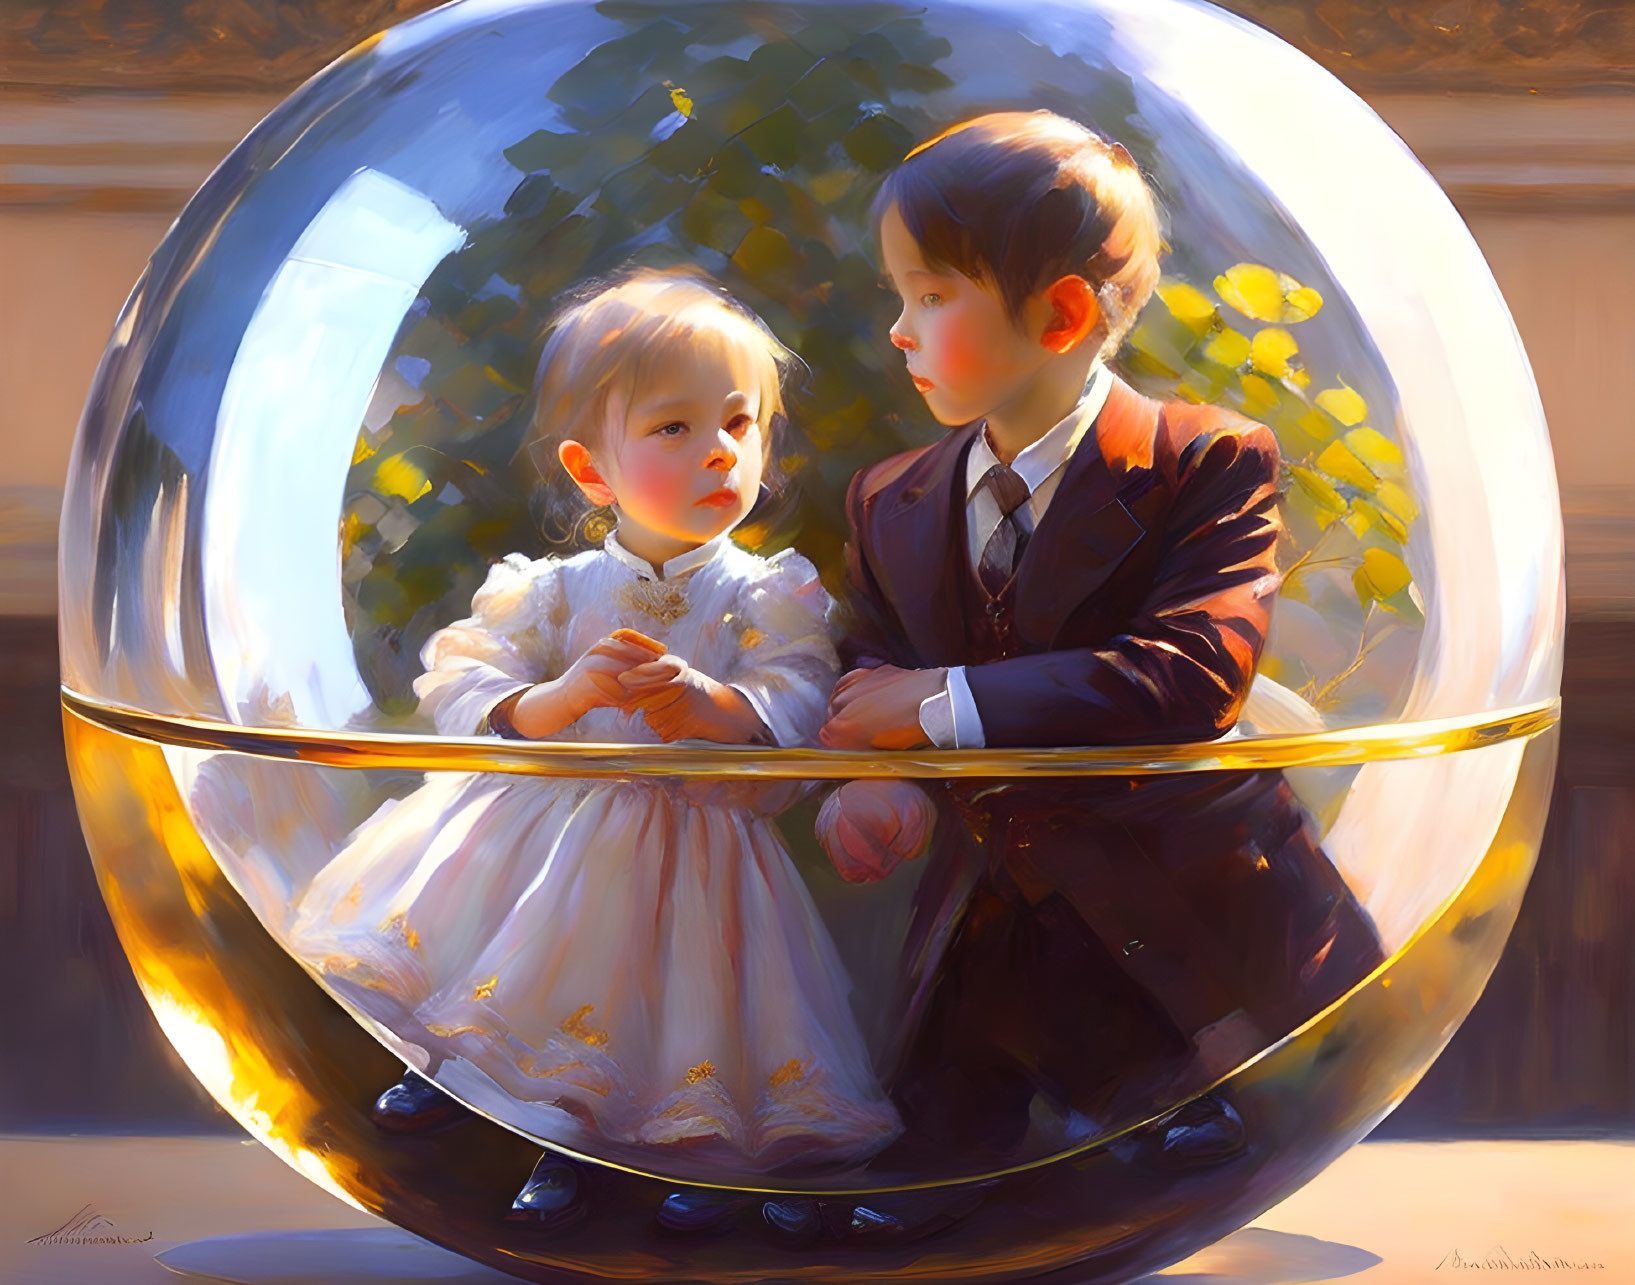 childs in the sphere